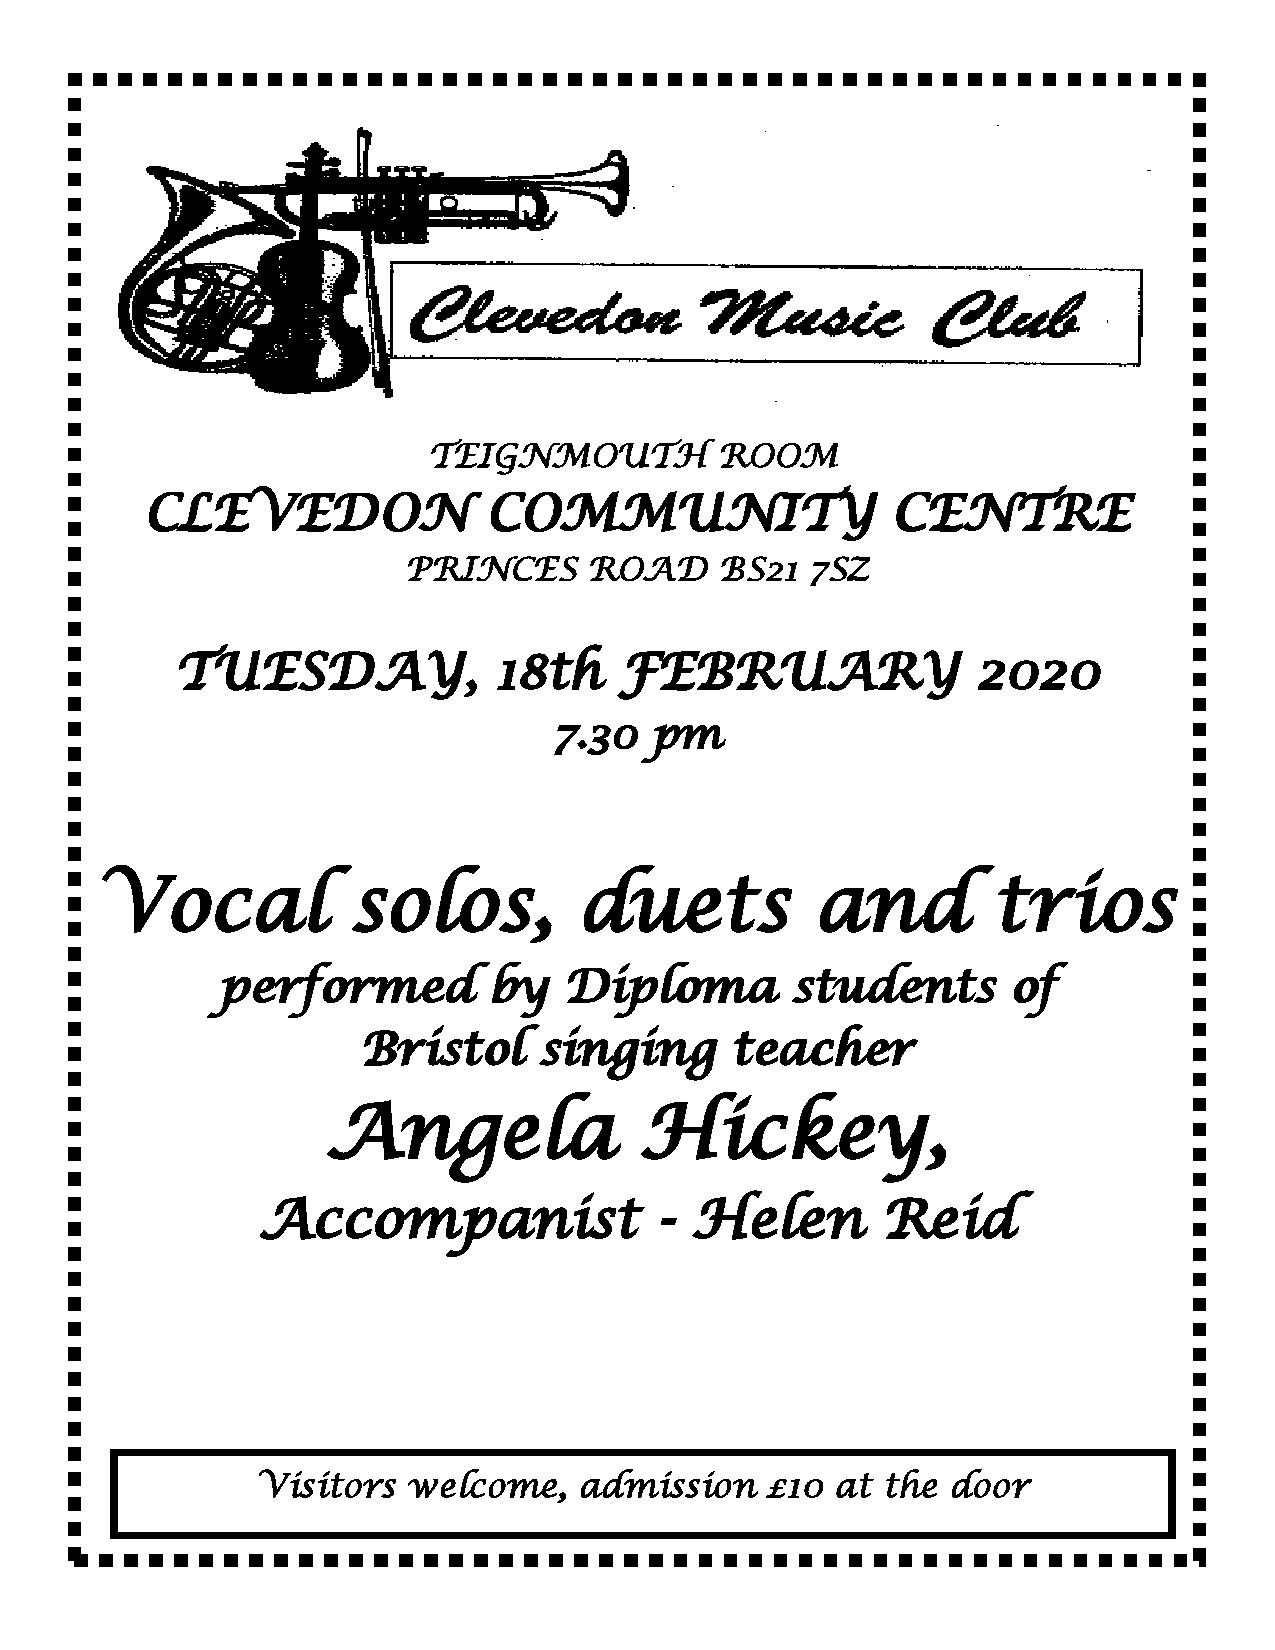 Clevedon Music Club poster